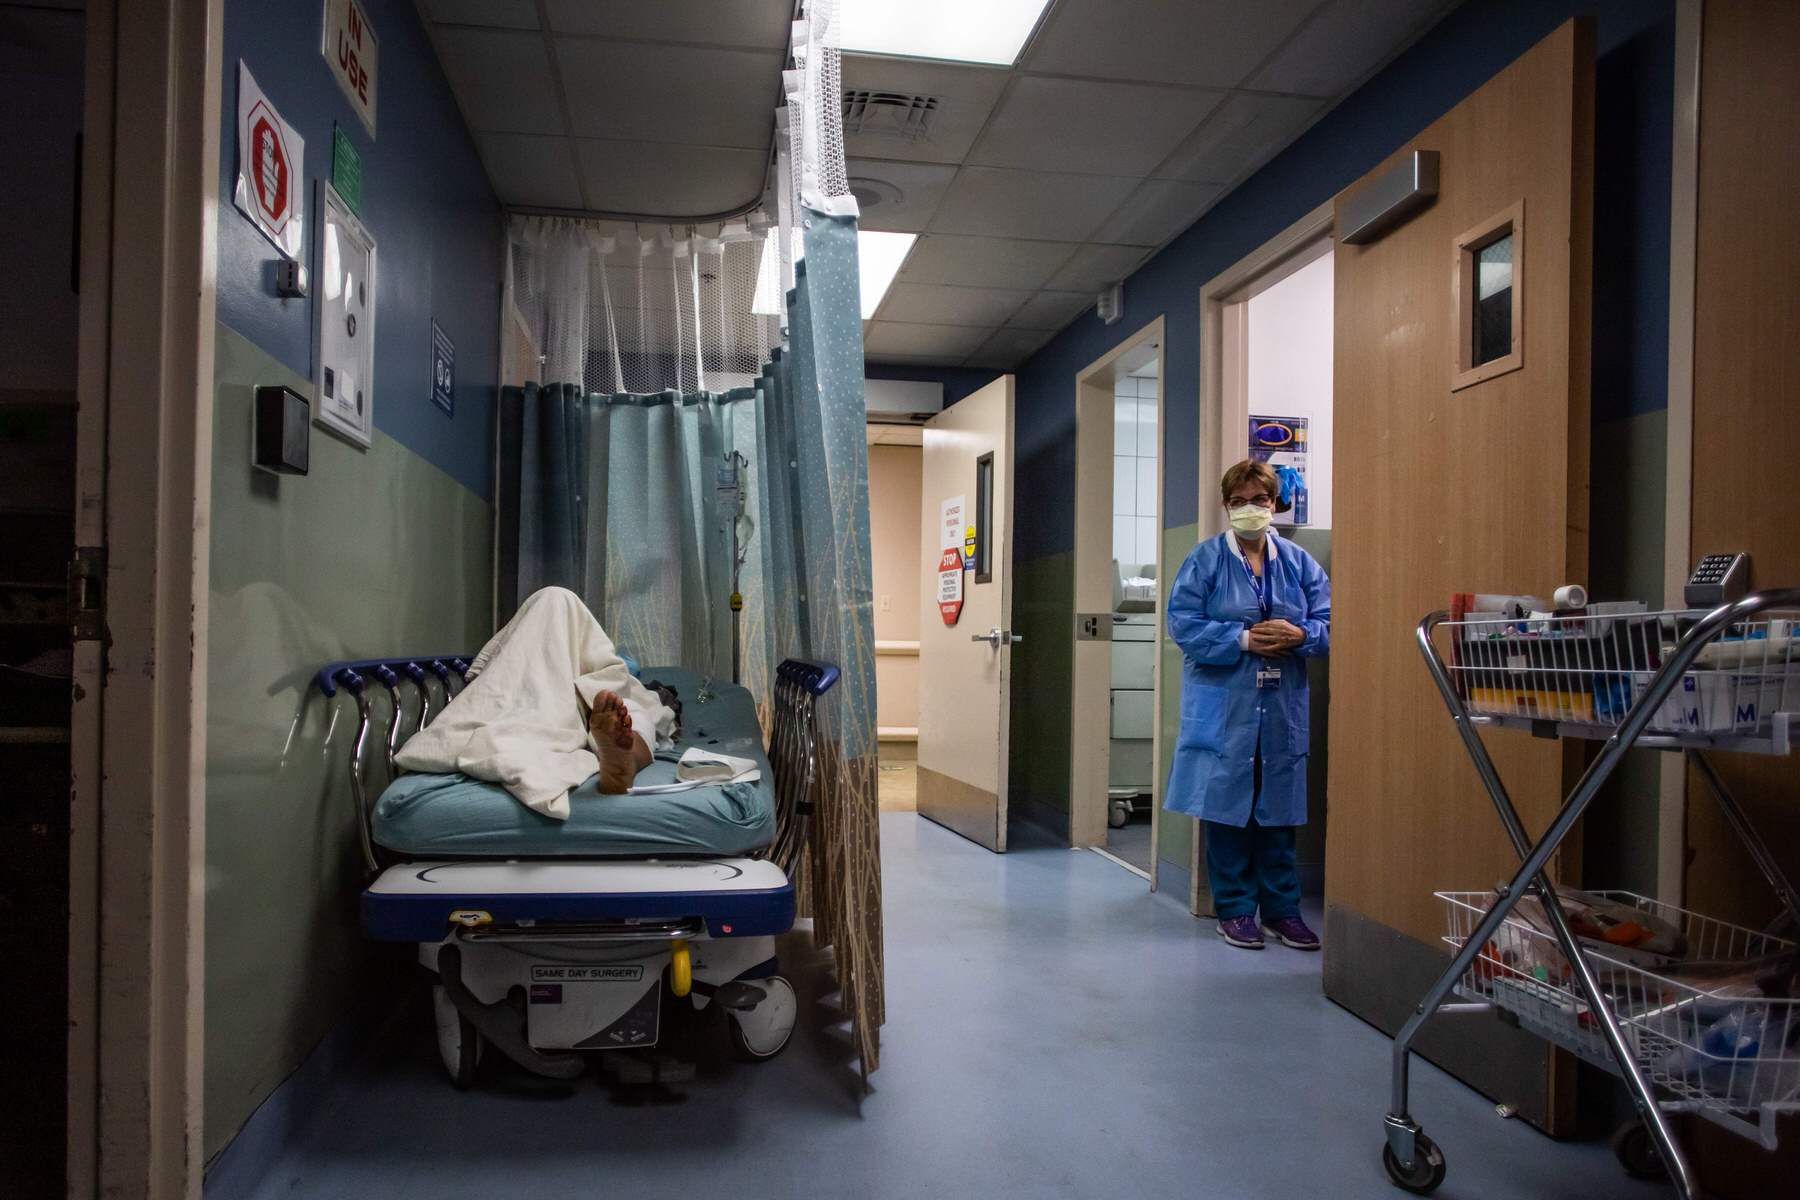 A patient rests in a corridor as a nurse looks on in the distance.